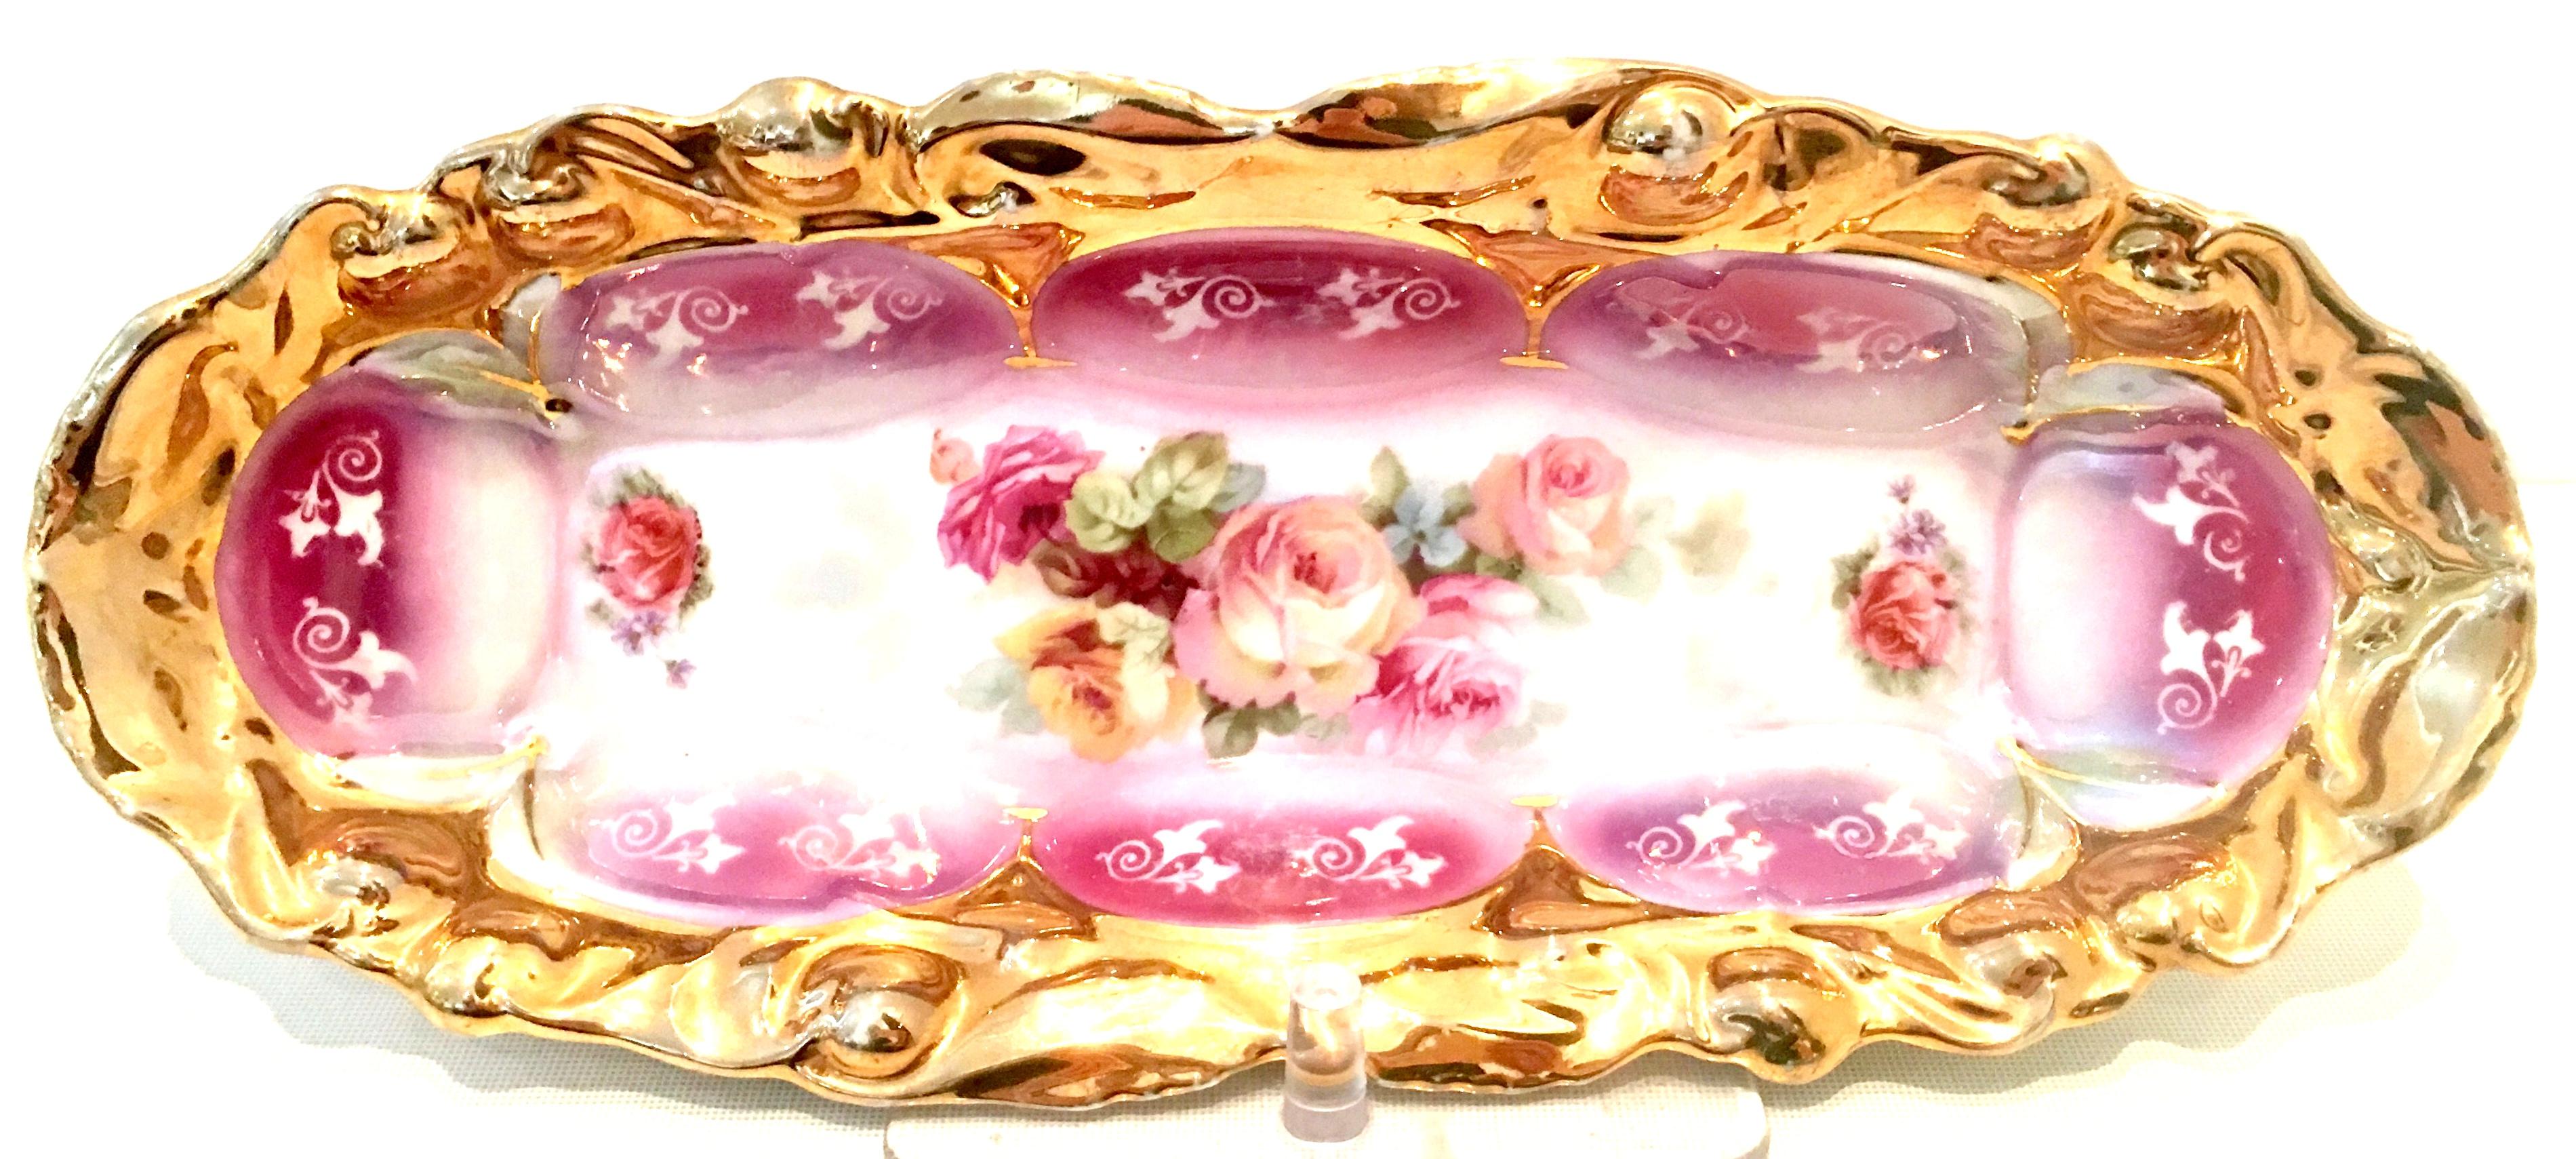 20th Century German porcelain hand painted 22-karat gold rose motif oval dish. Features a white ground with vibrant pink, green and purple rose motif and heavily applied 22-karat gilt gold detail. Signed on the underside, made in Germany 13.